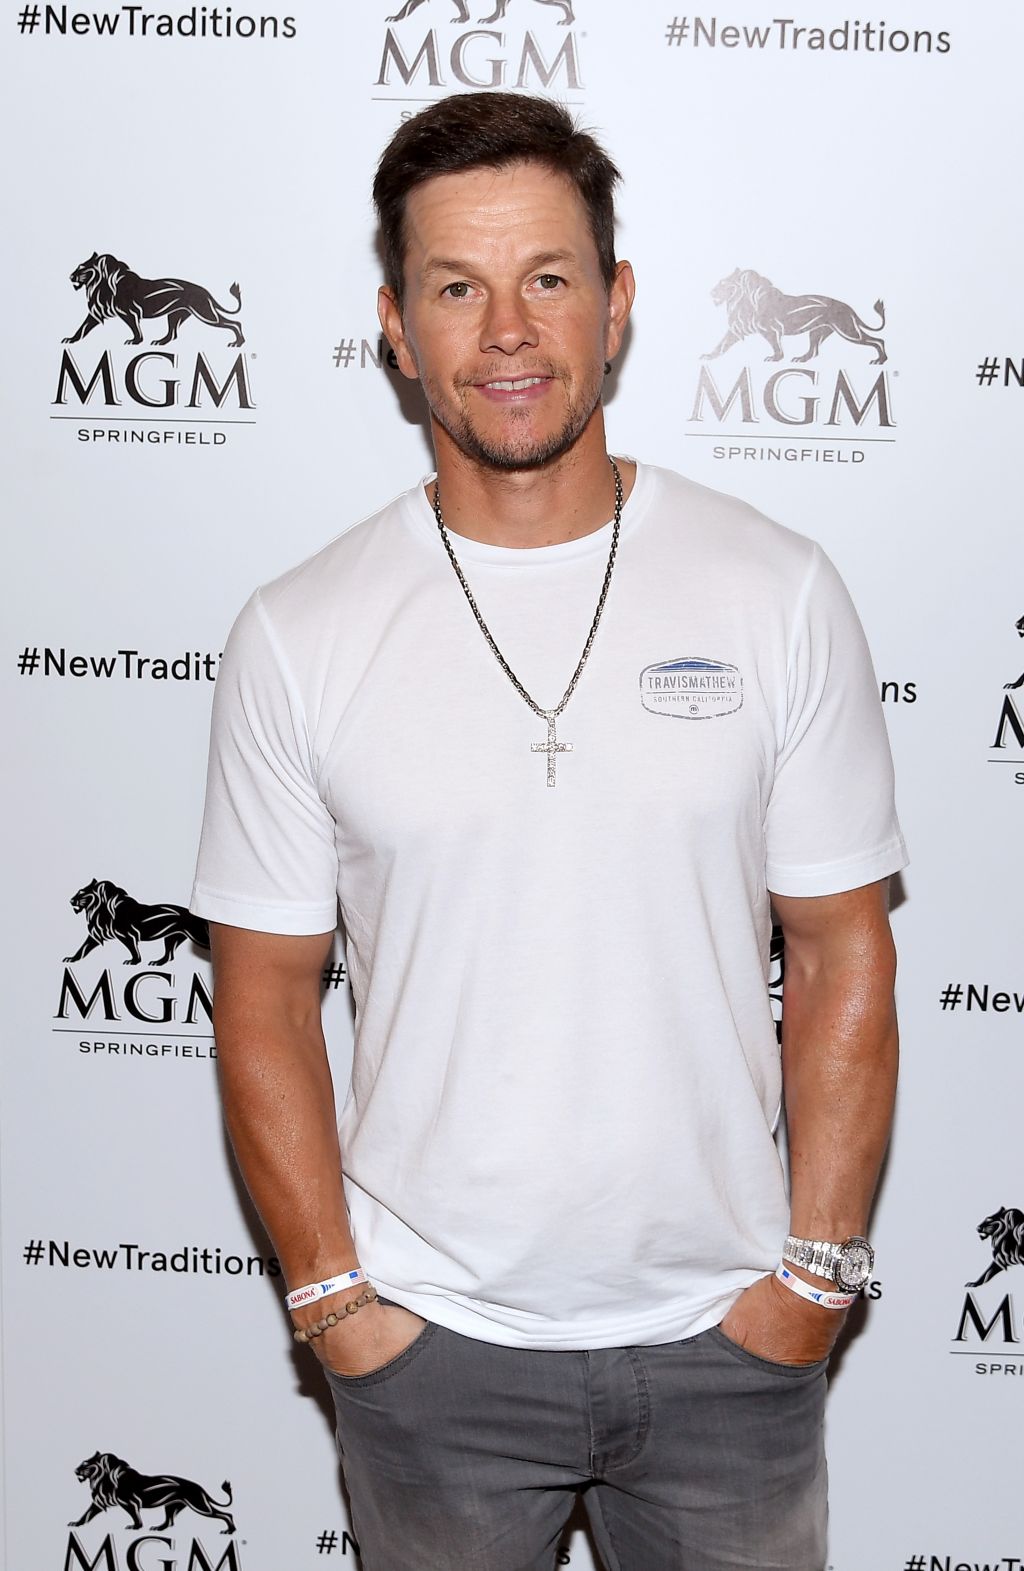 Mark Wahlberg Announces New Wahlburgers Location Coming To MGM Springfield In Late 2019